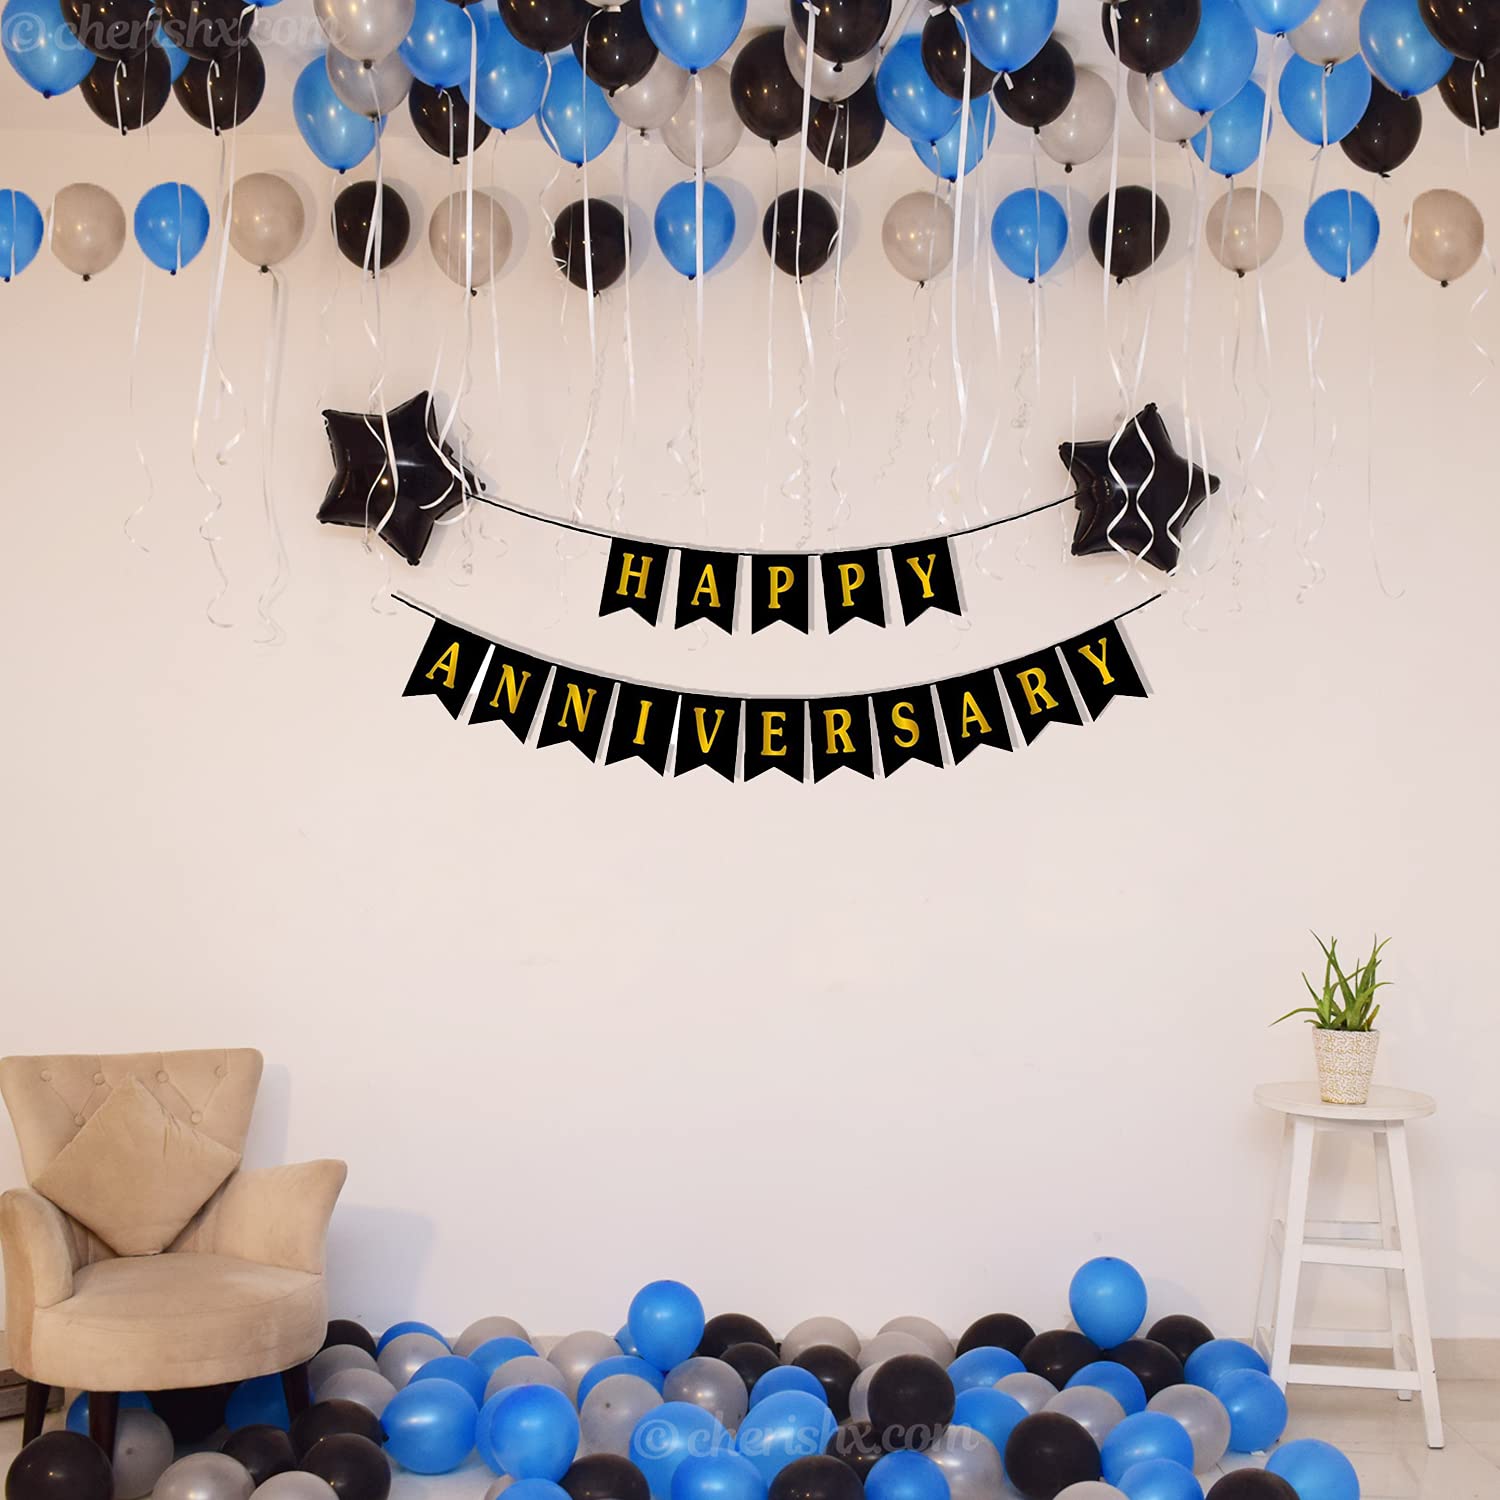 Blue & Black Happy Anniversary Decoration Items For Room - Pack of 49 Pcs - Bunting, Star Shape Foil & Metallic Balloons - Wall Backdrop Decoration - CherishX Partystore